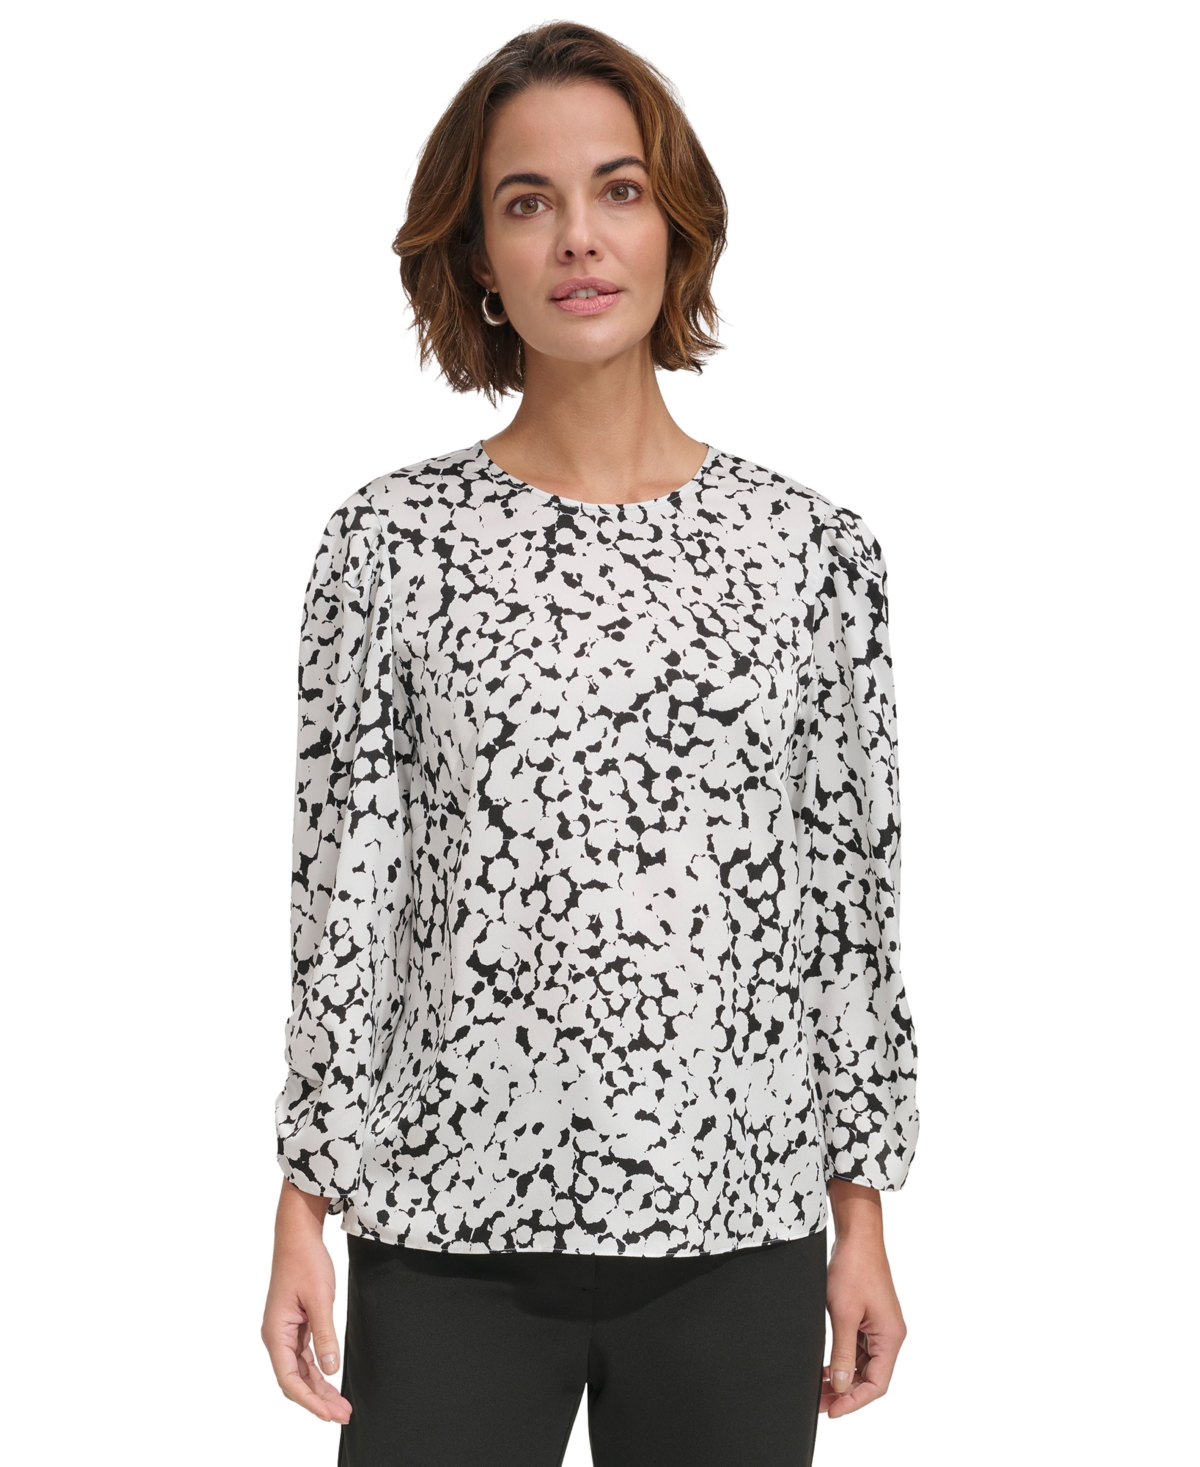 Women's Printed Ruched-Sleeve Crewneck Blouse - Ivory/black